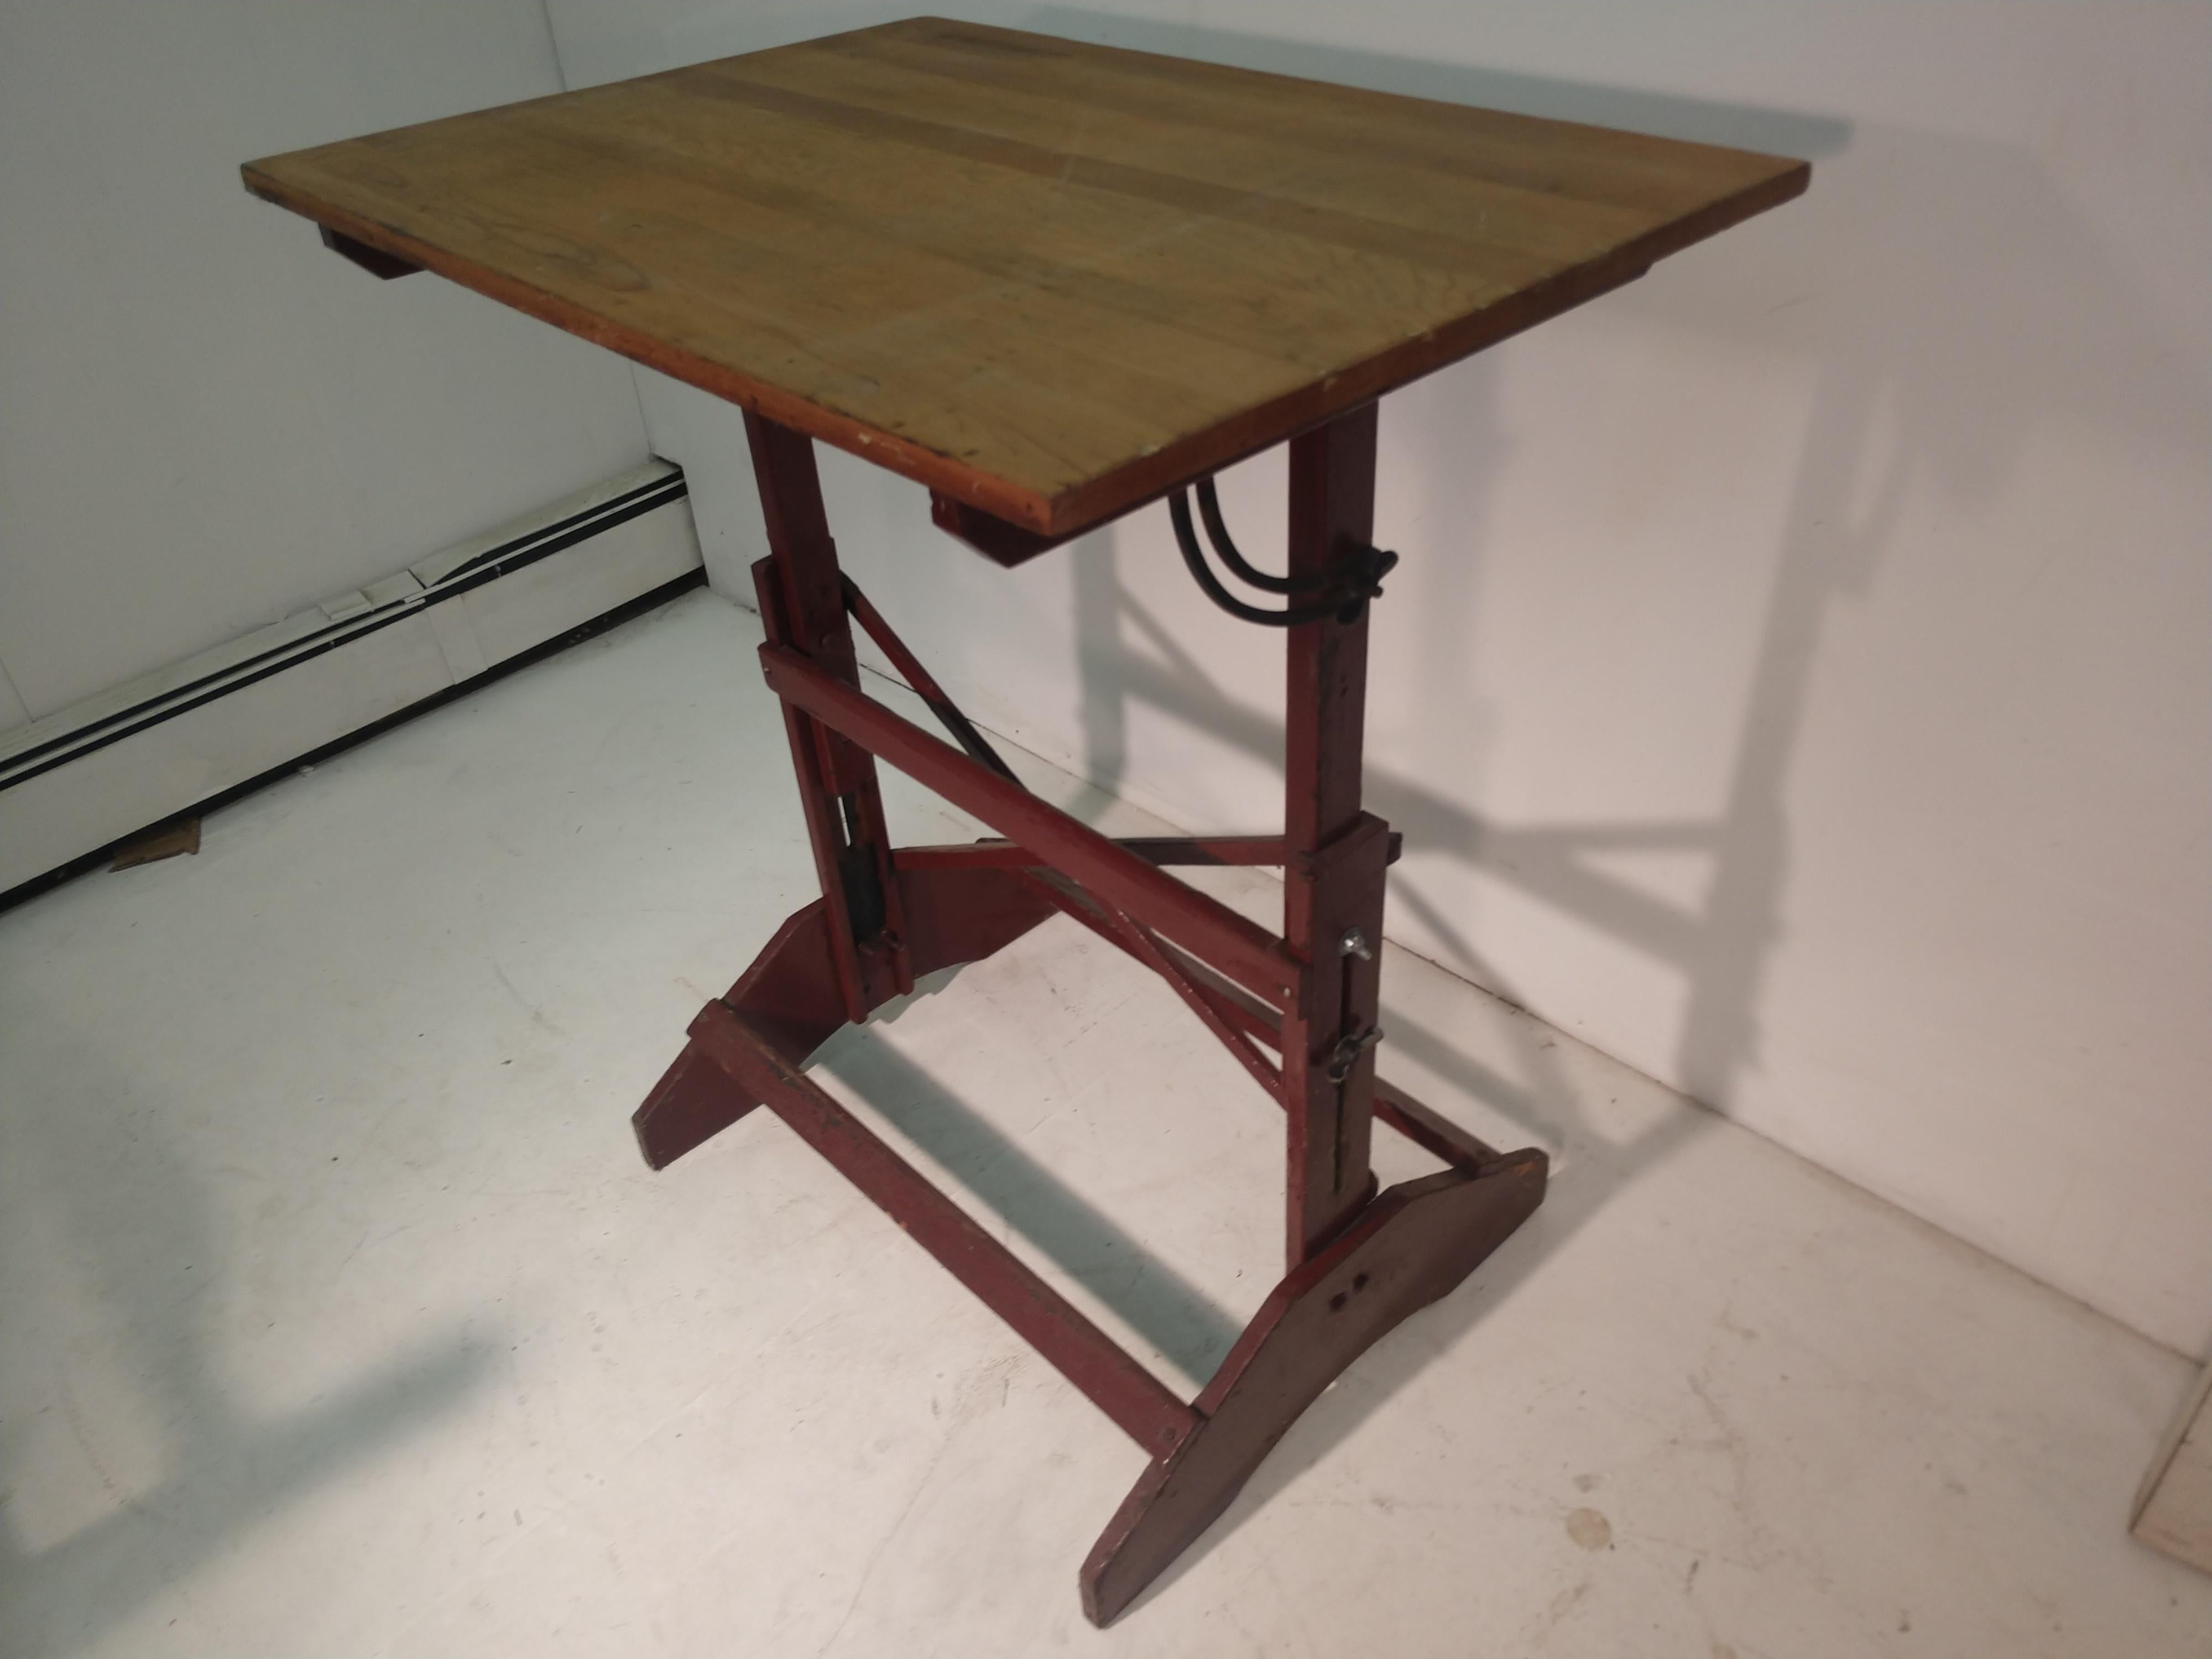 Fully adjustable drafting table in pine. Lightweight for maneuverability. Base is painted a reddish brown. Lowers to 31 inches in hgt. Excellent standing desk to work at.